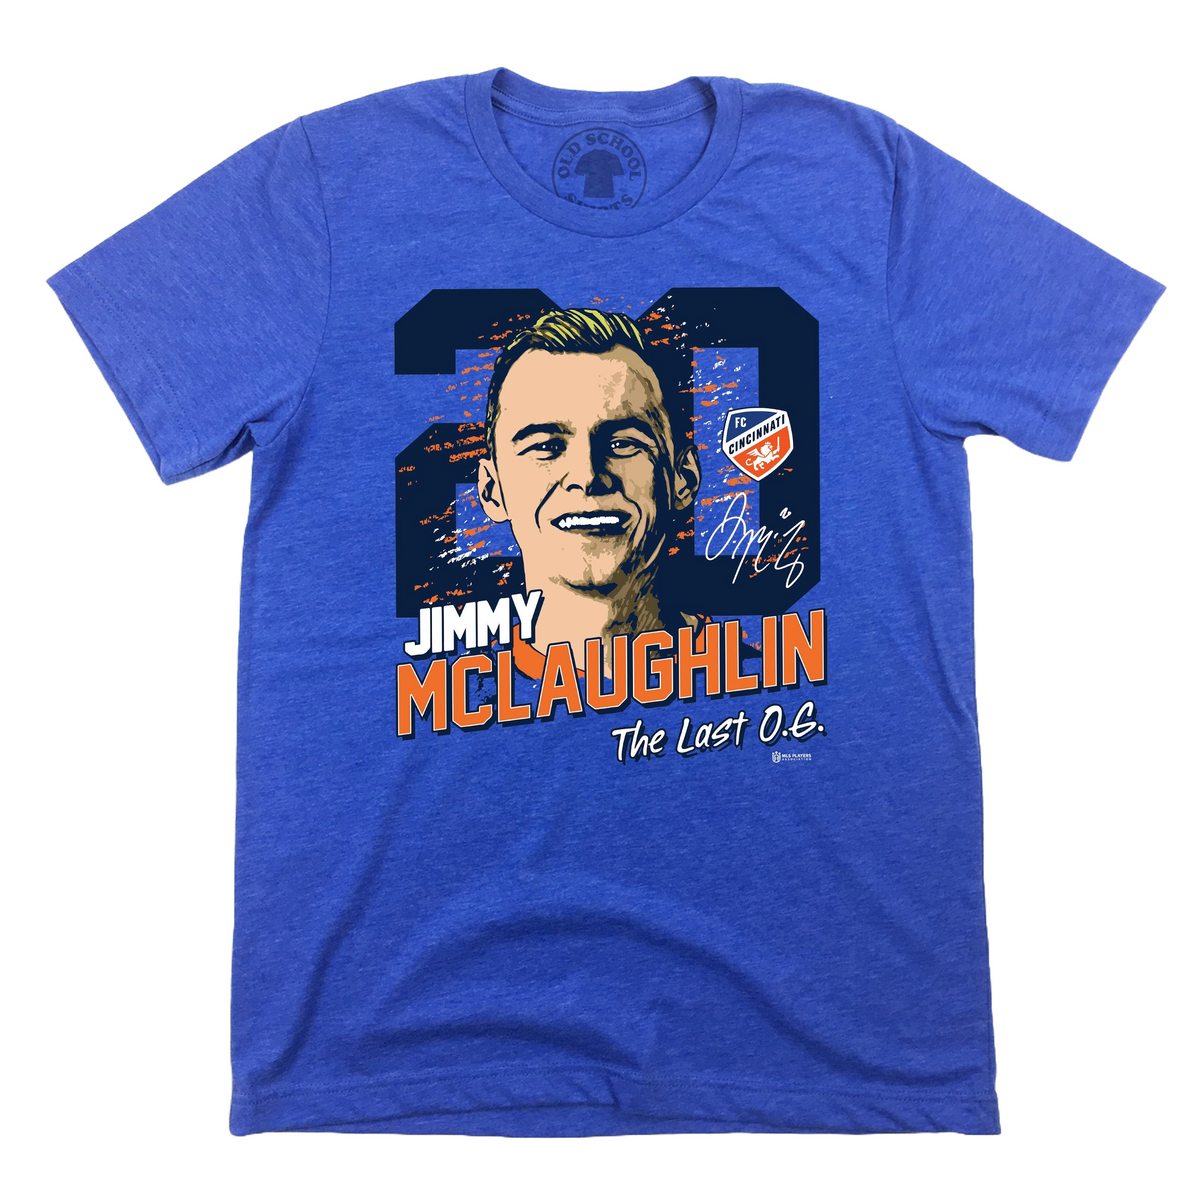 Official Jimmy McLaughlin MLSPA Tee